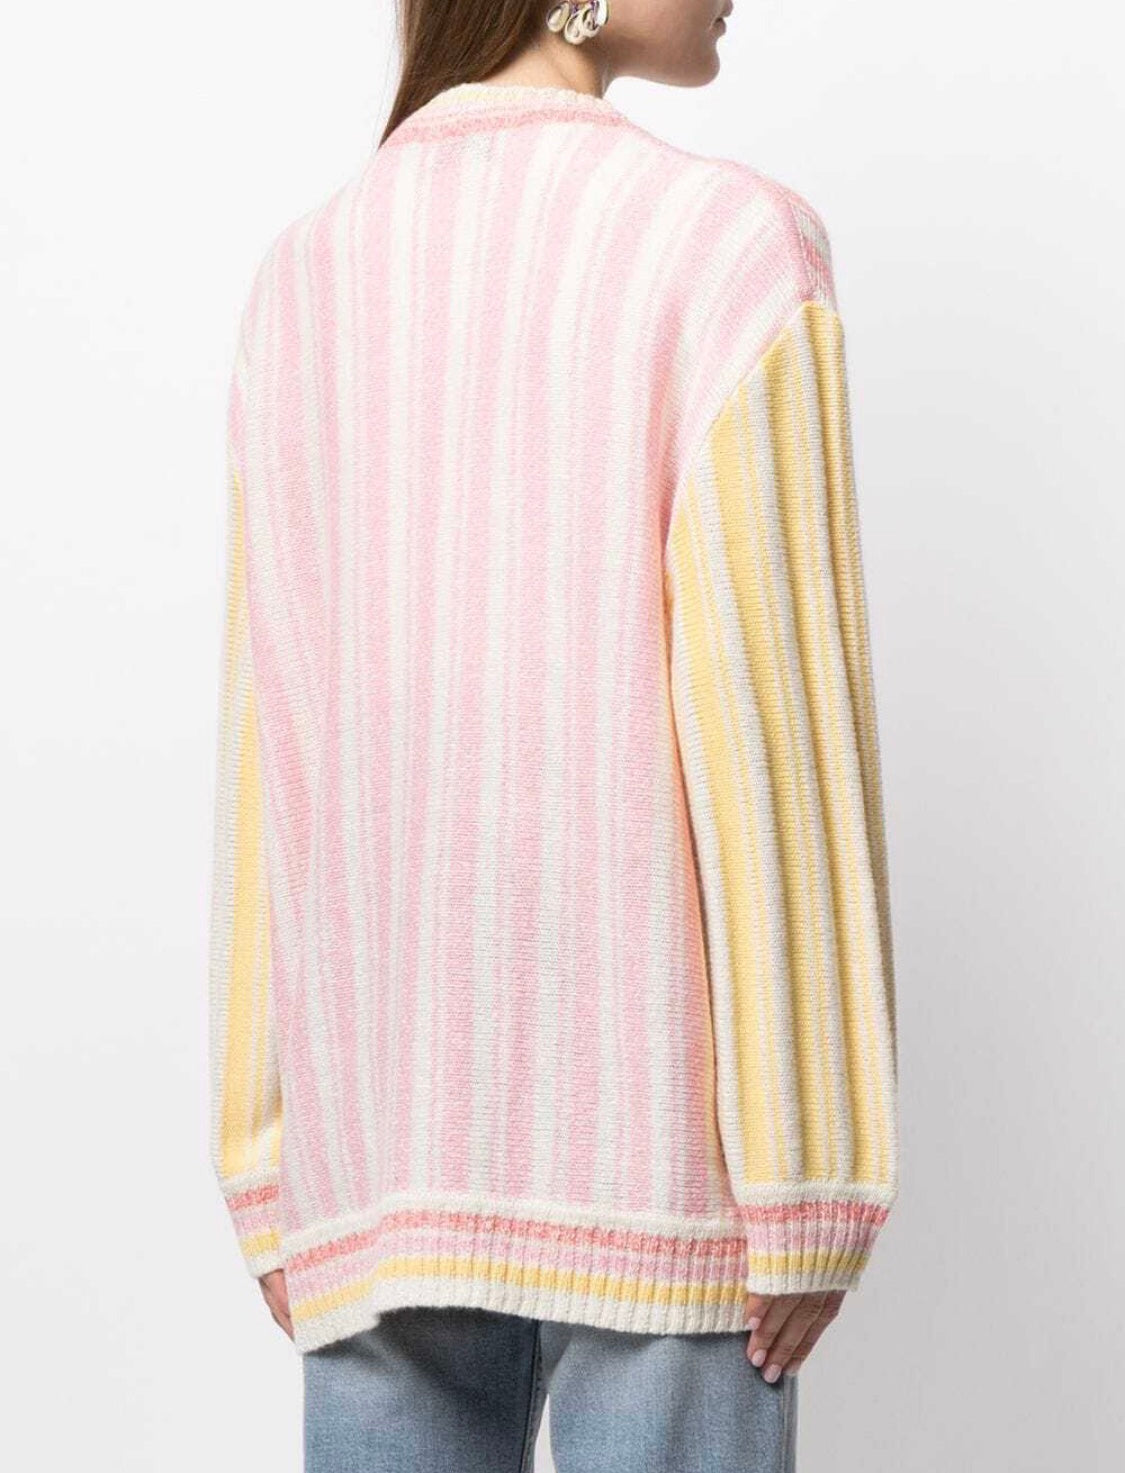 MIRA MIKATI Cashmere Linen Golf embroidered cardigan size 42 RRP: £640